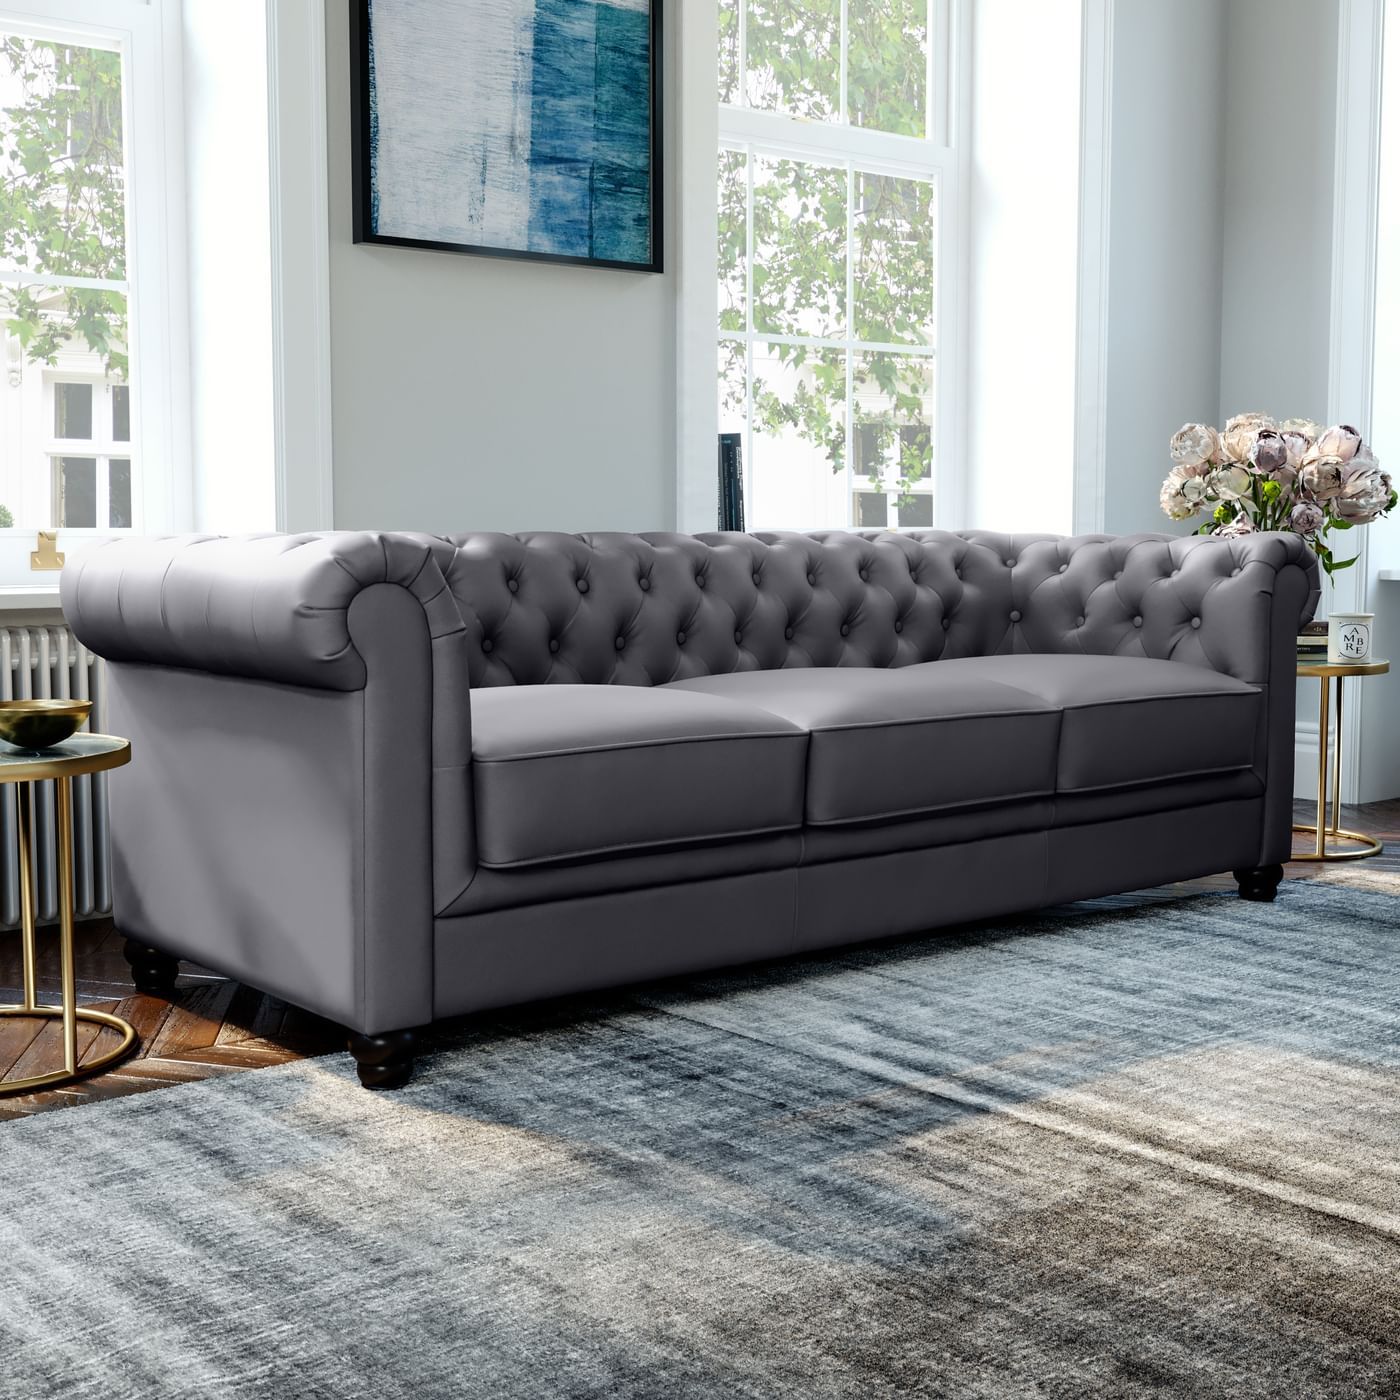 Hampton Grey Leather 3 Seater Chesterfield Sofa | Furniture Choice With Regard To Traditional 3 Seater Sofas (View 11 of 20)